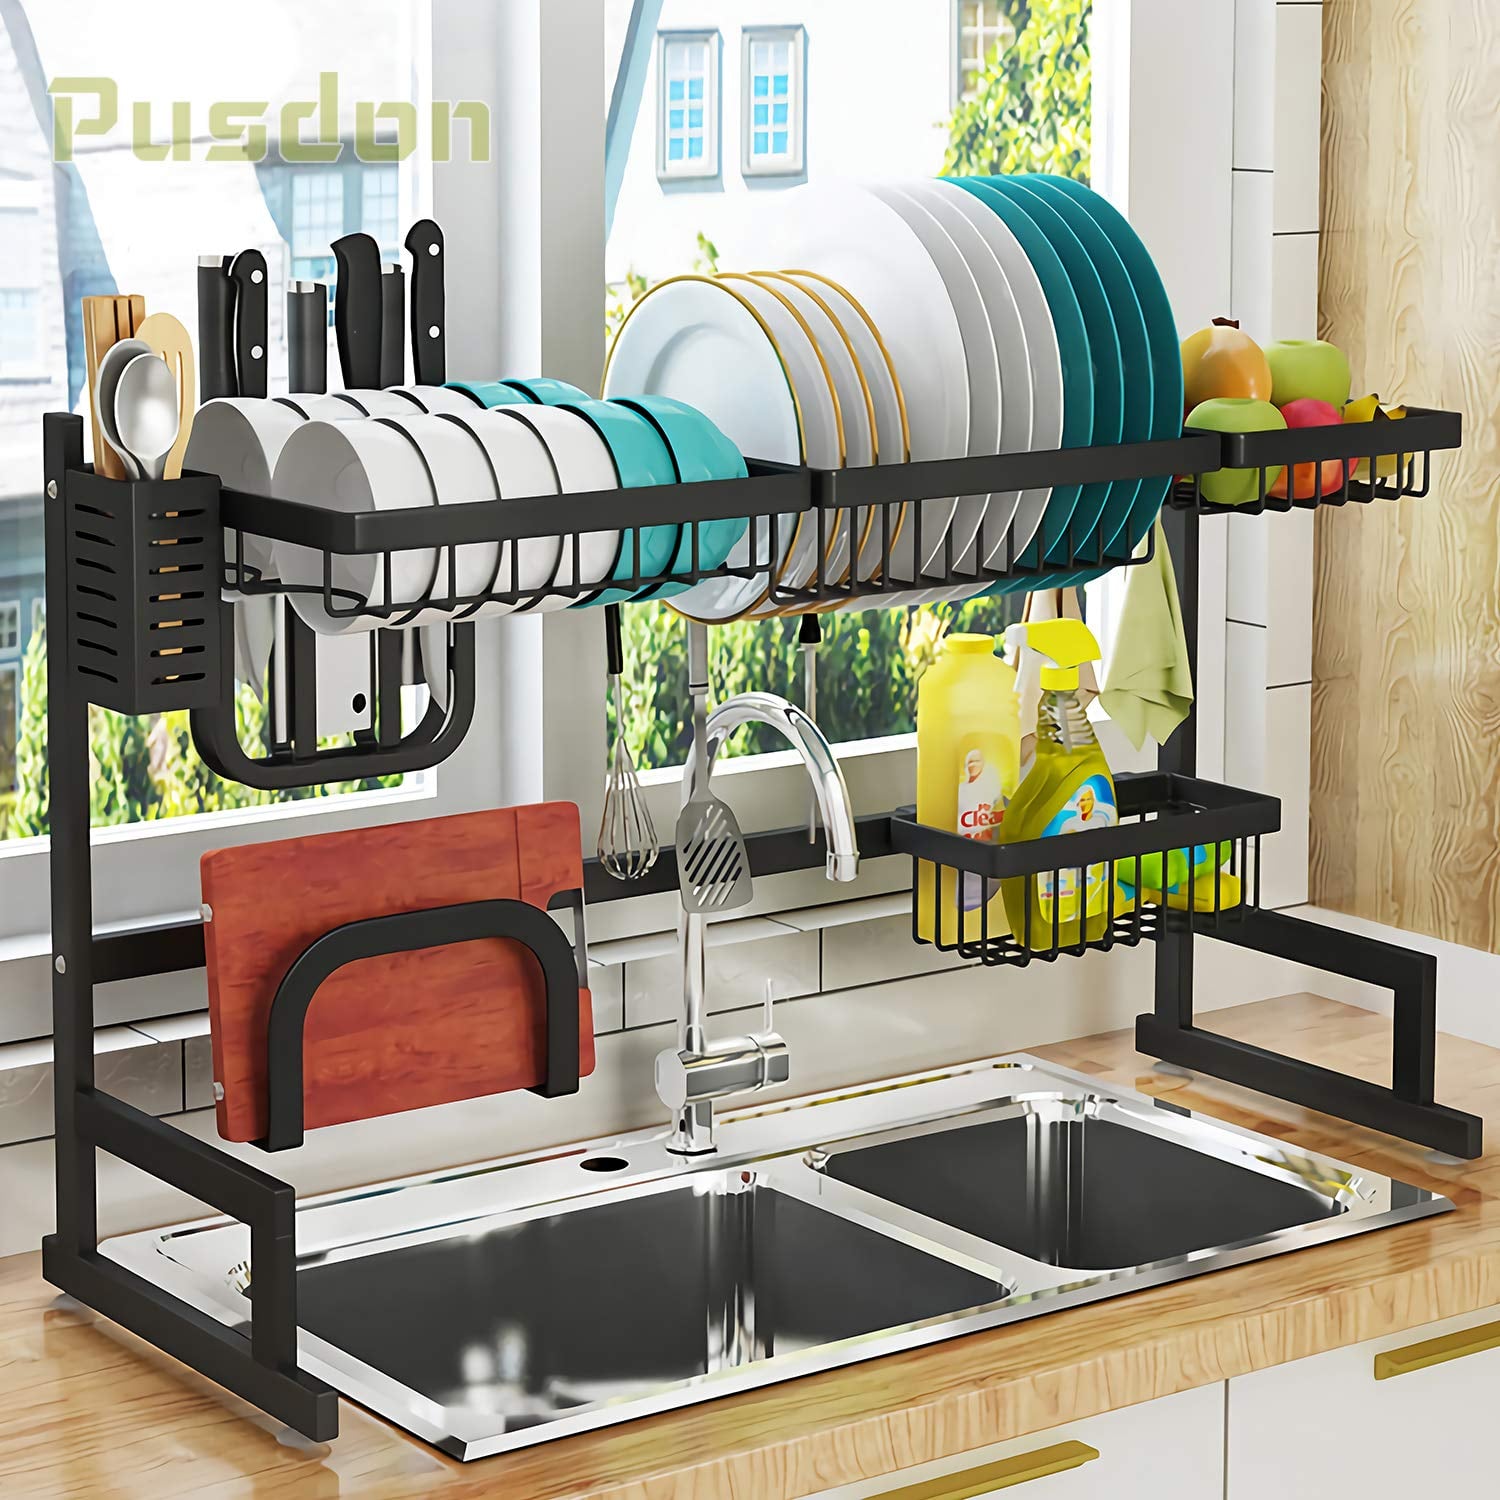 7 Best Kitchen Accessories for a Super Organised Petite Space